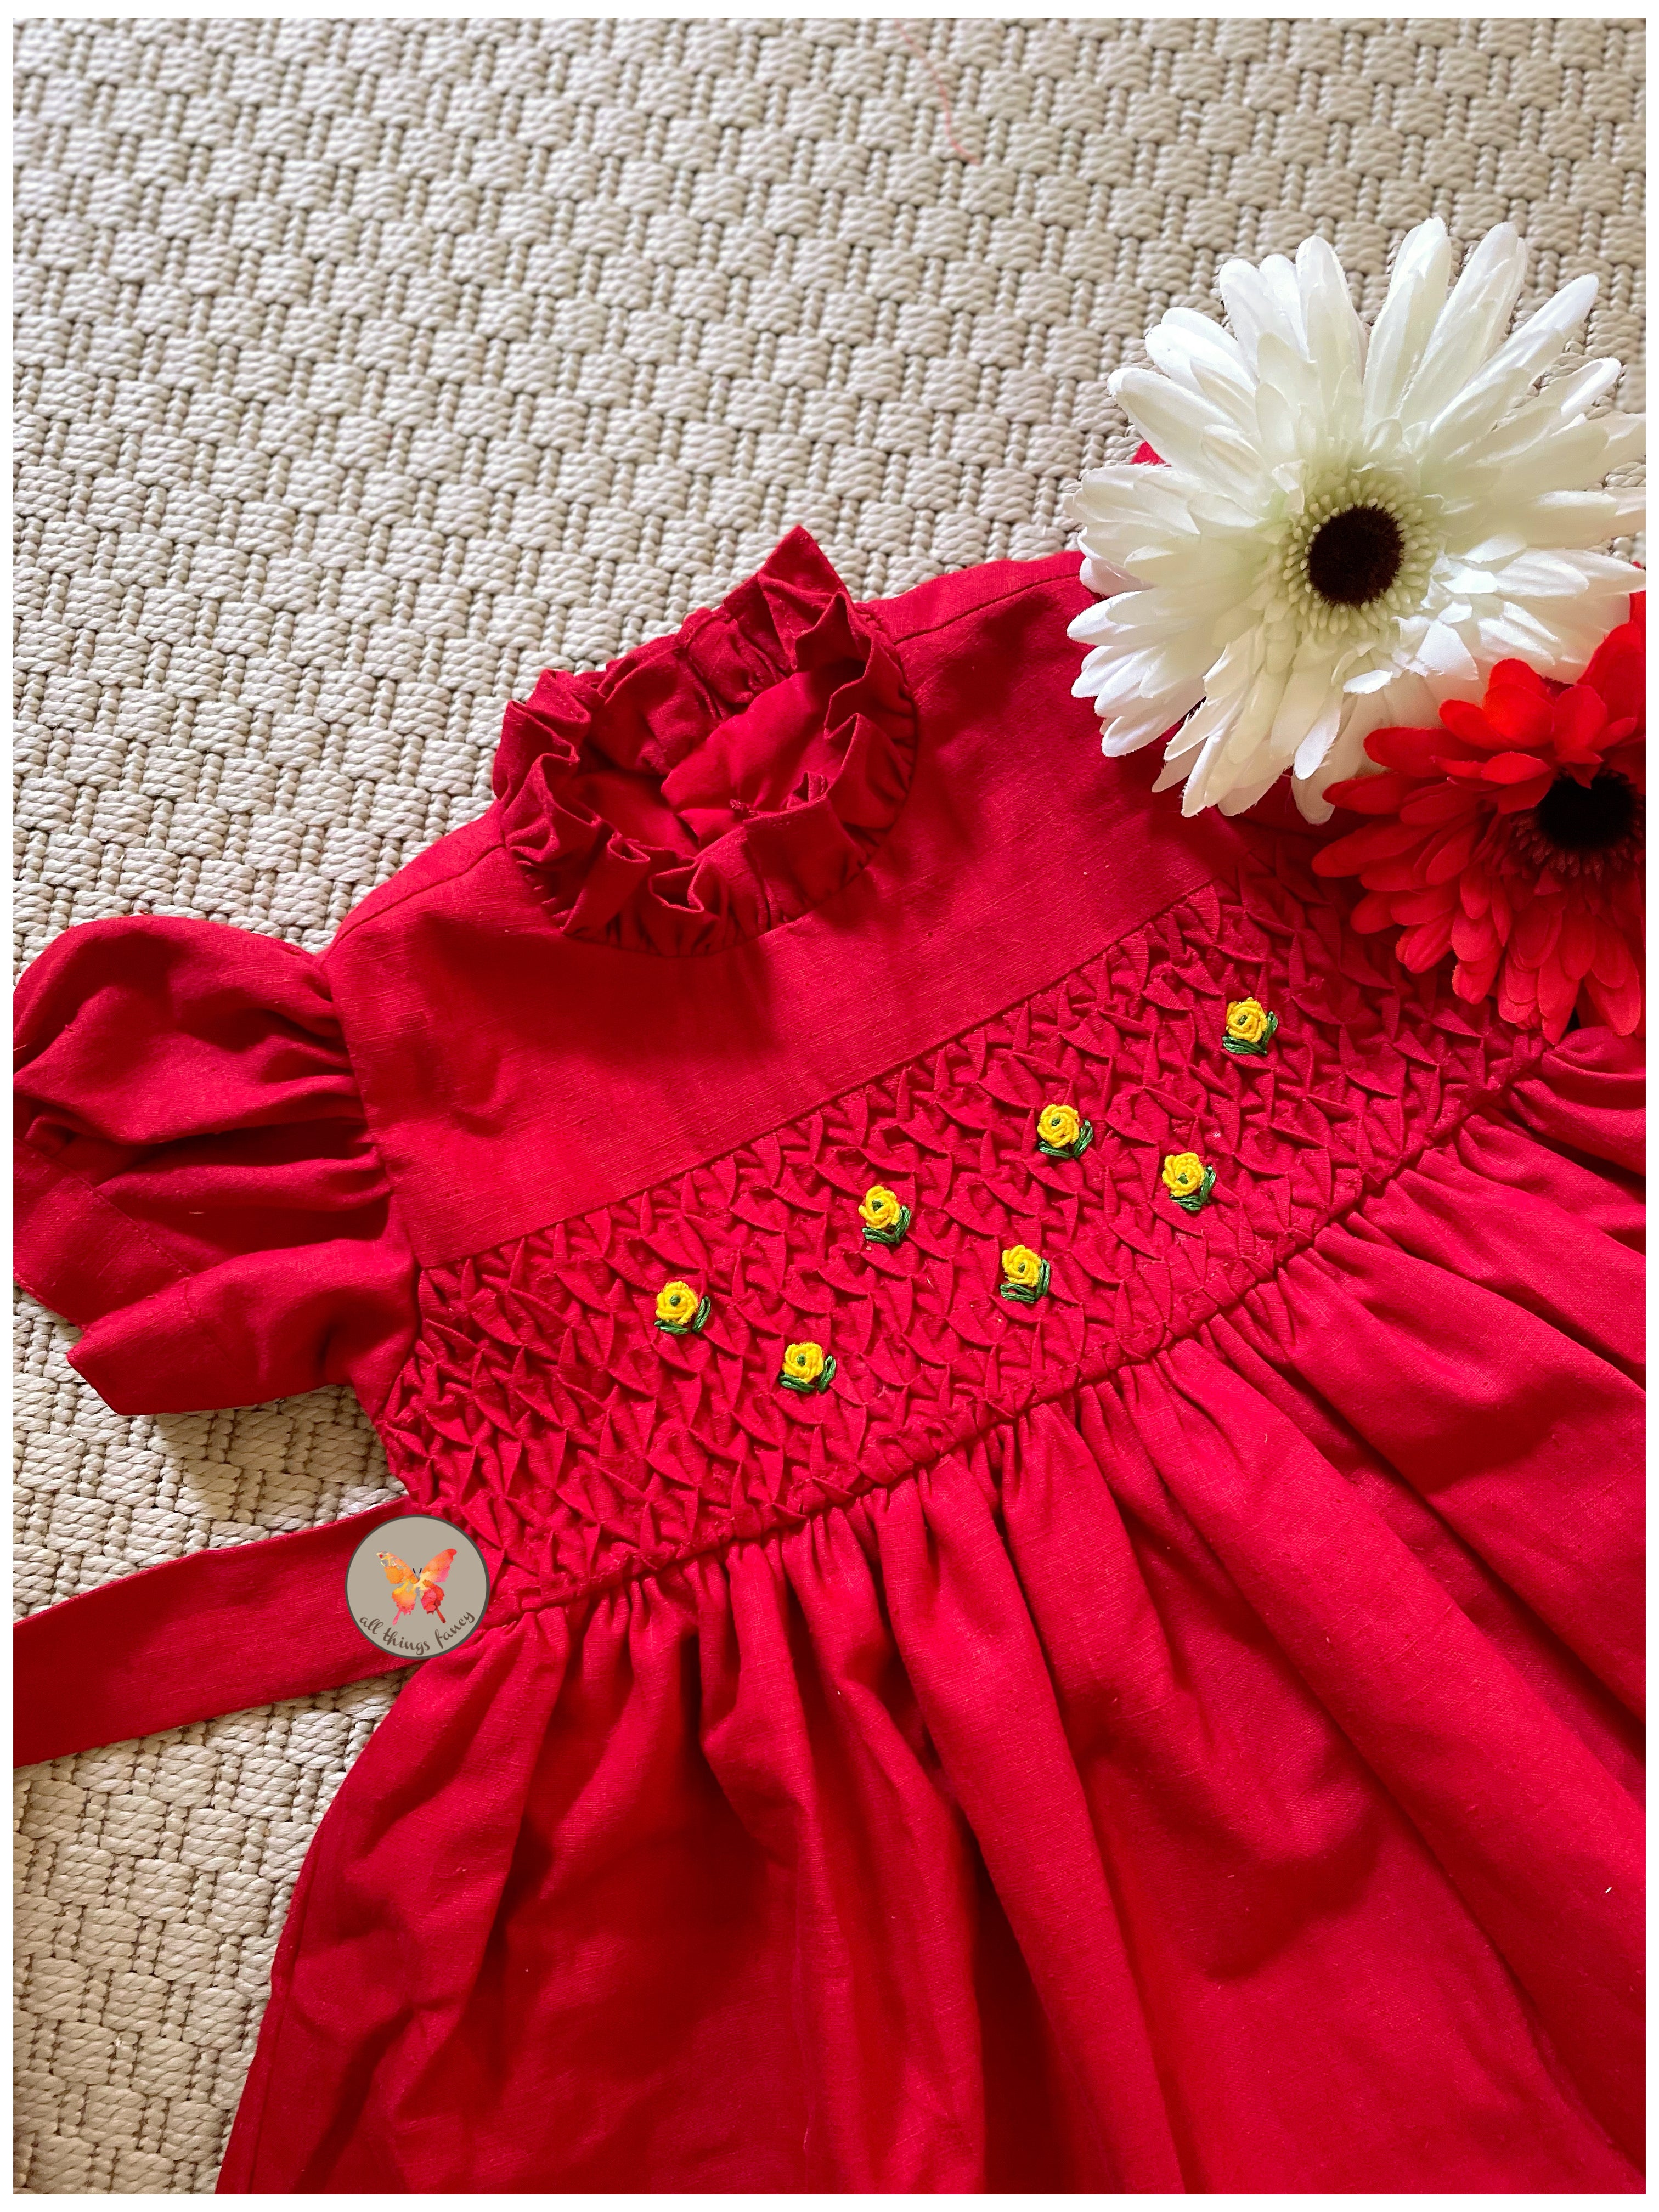 Frenchknot Dress - Red